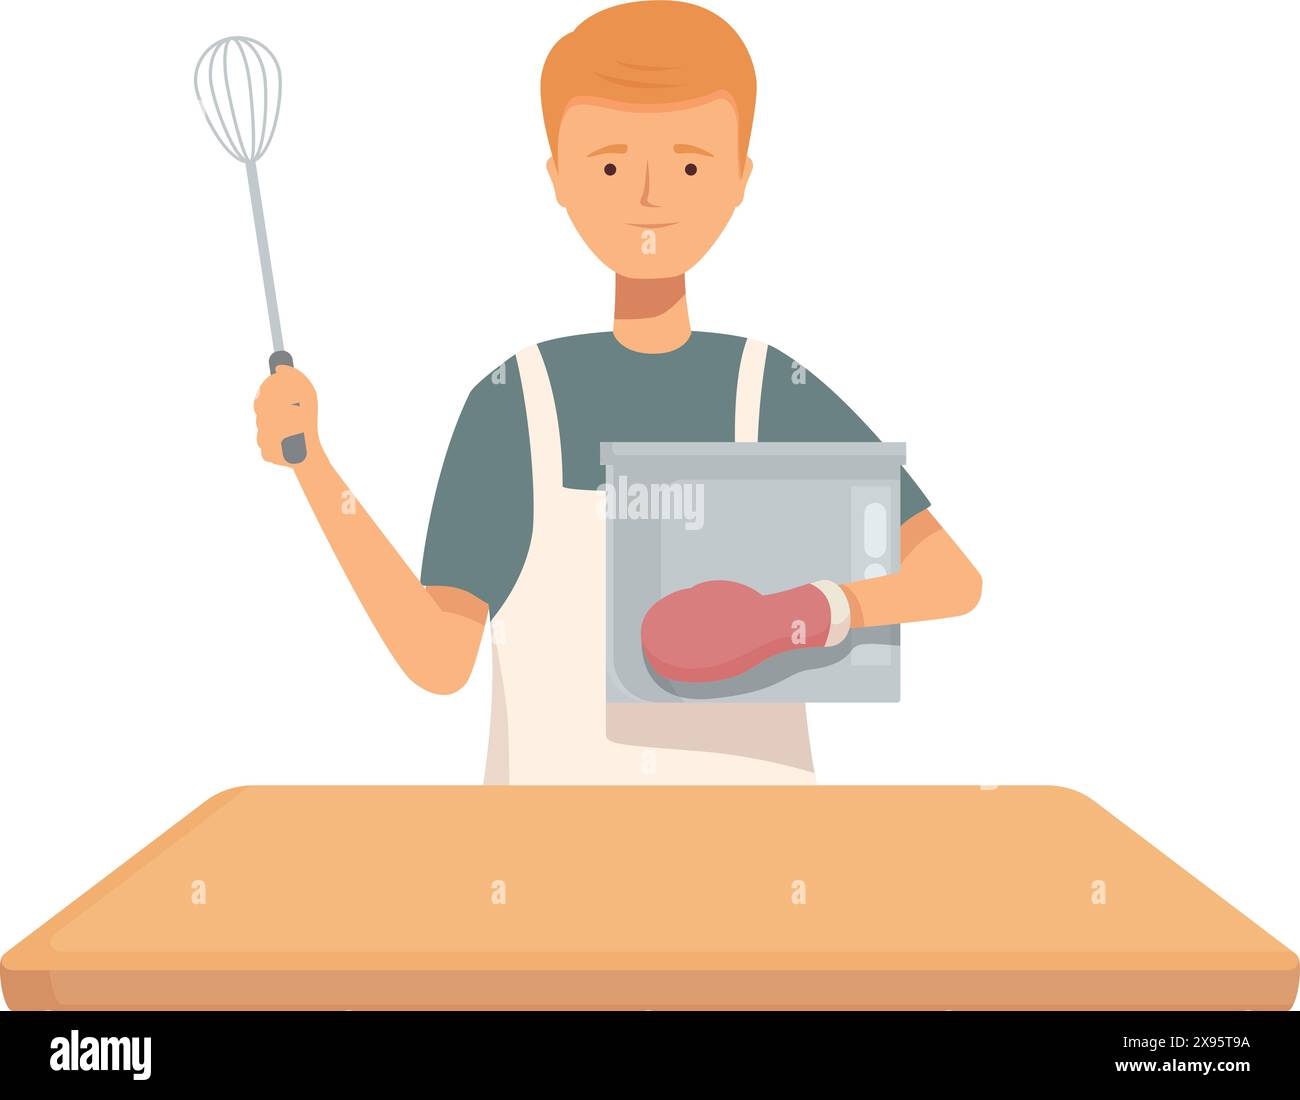 Cartoon of a happy man making dough, holding a mixer and a bowl in the kitchen Stock Vector